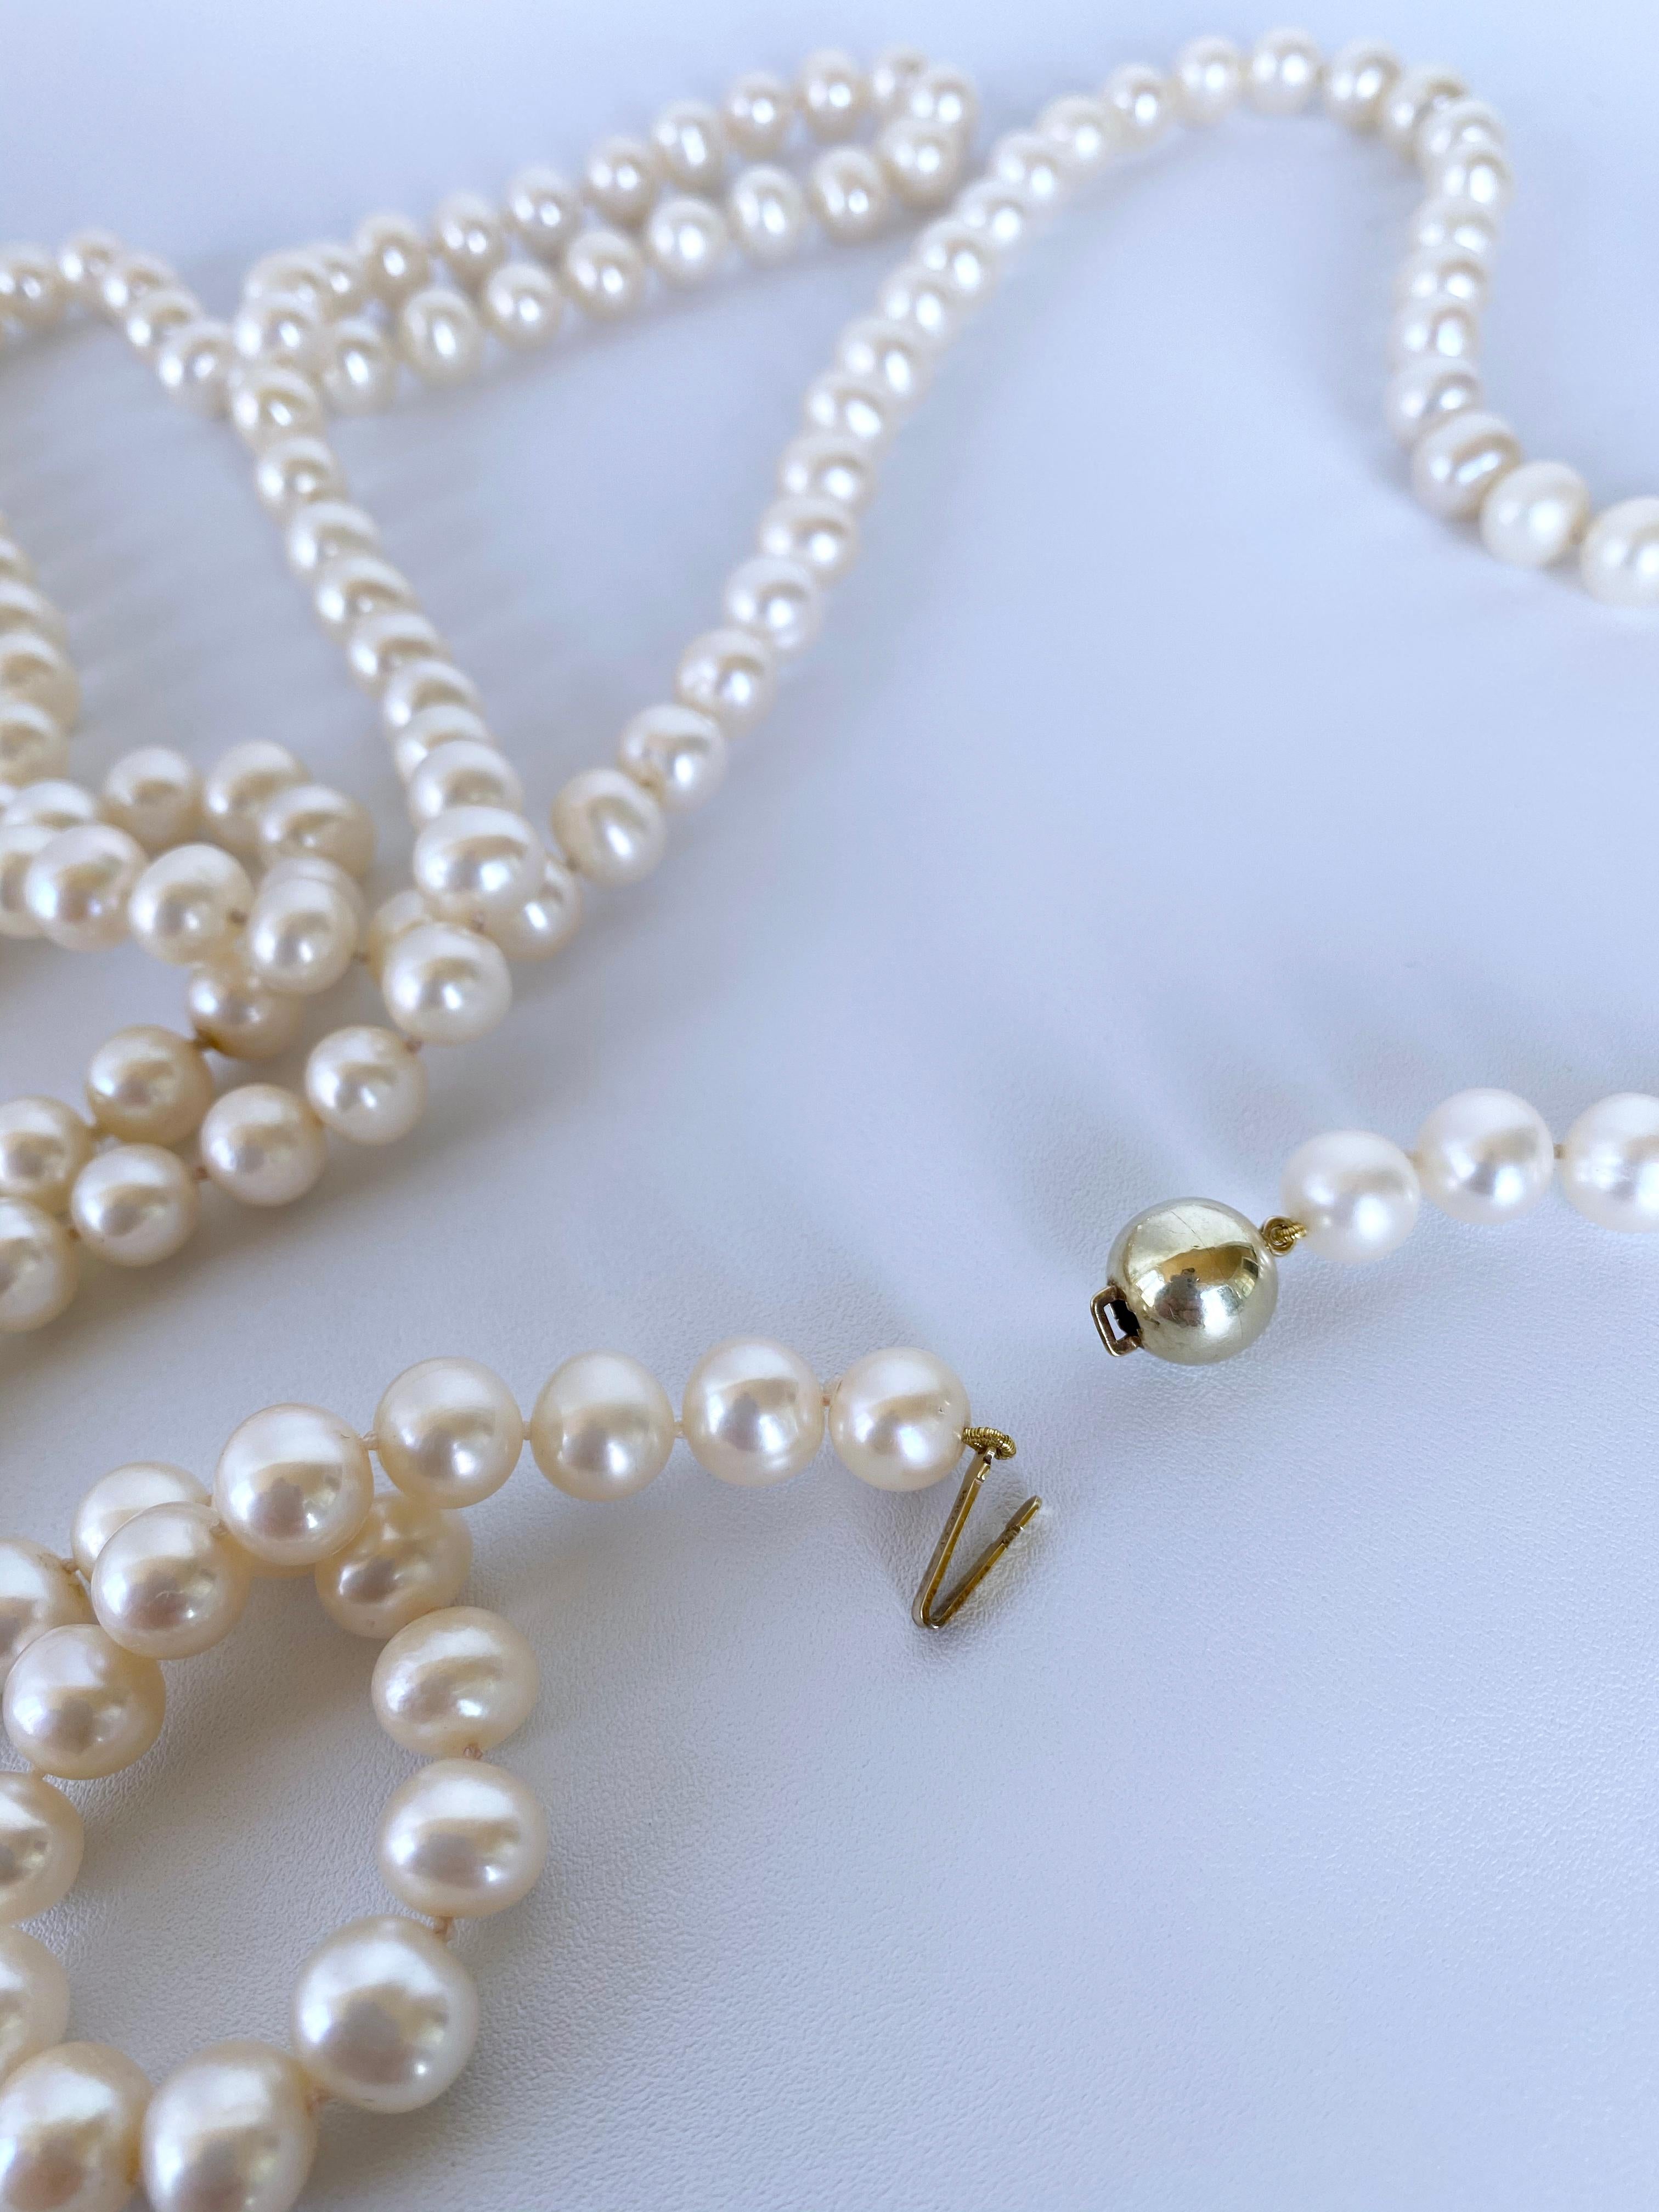 Artisan Marina J. Long Pearl Knotted Necklace with 14k Yellow Gold Ball Clasp